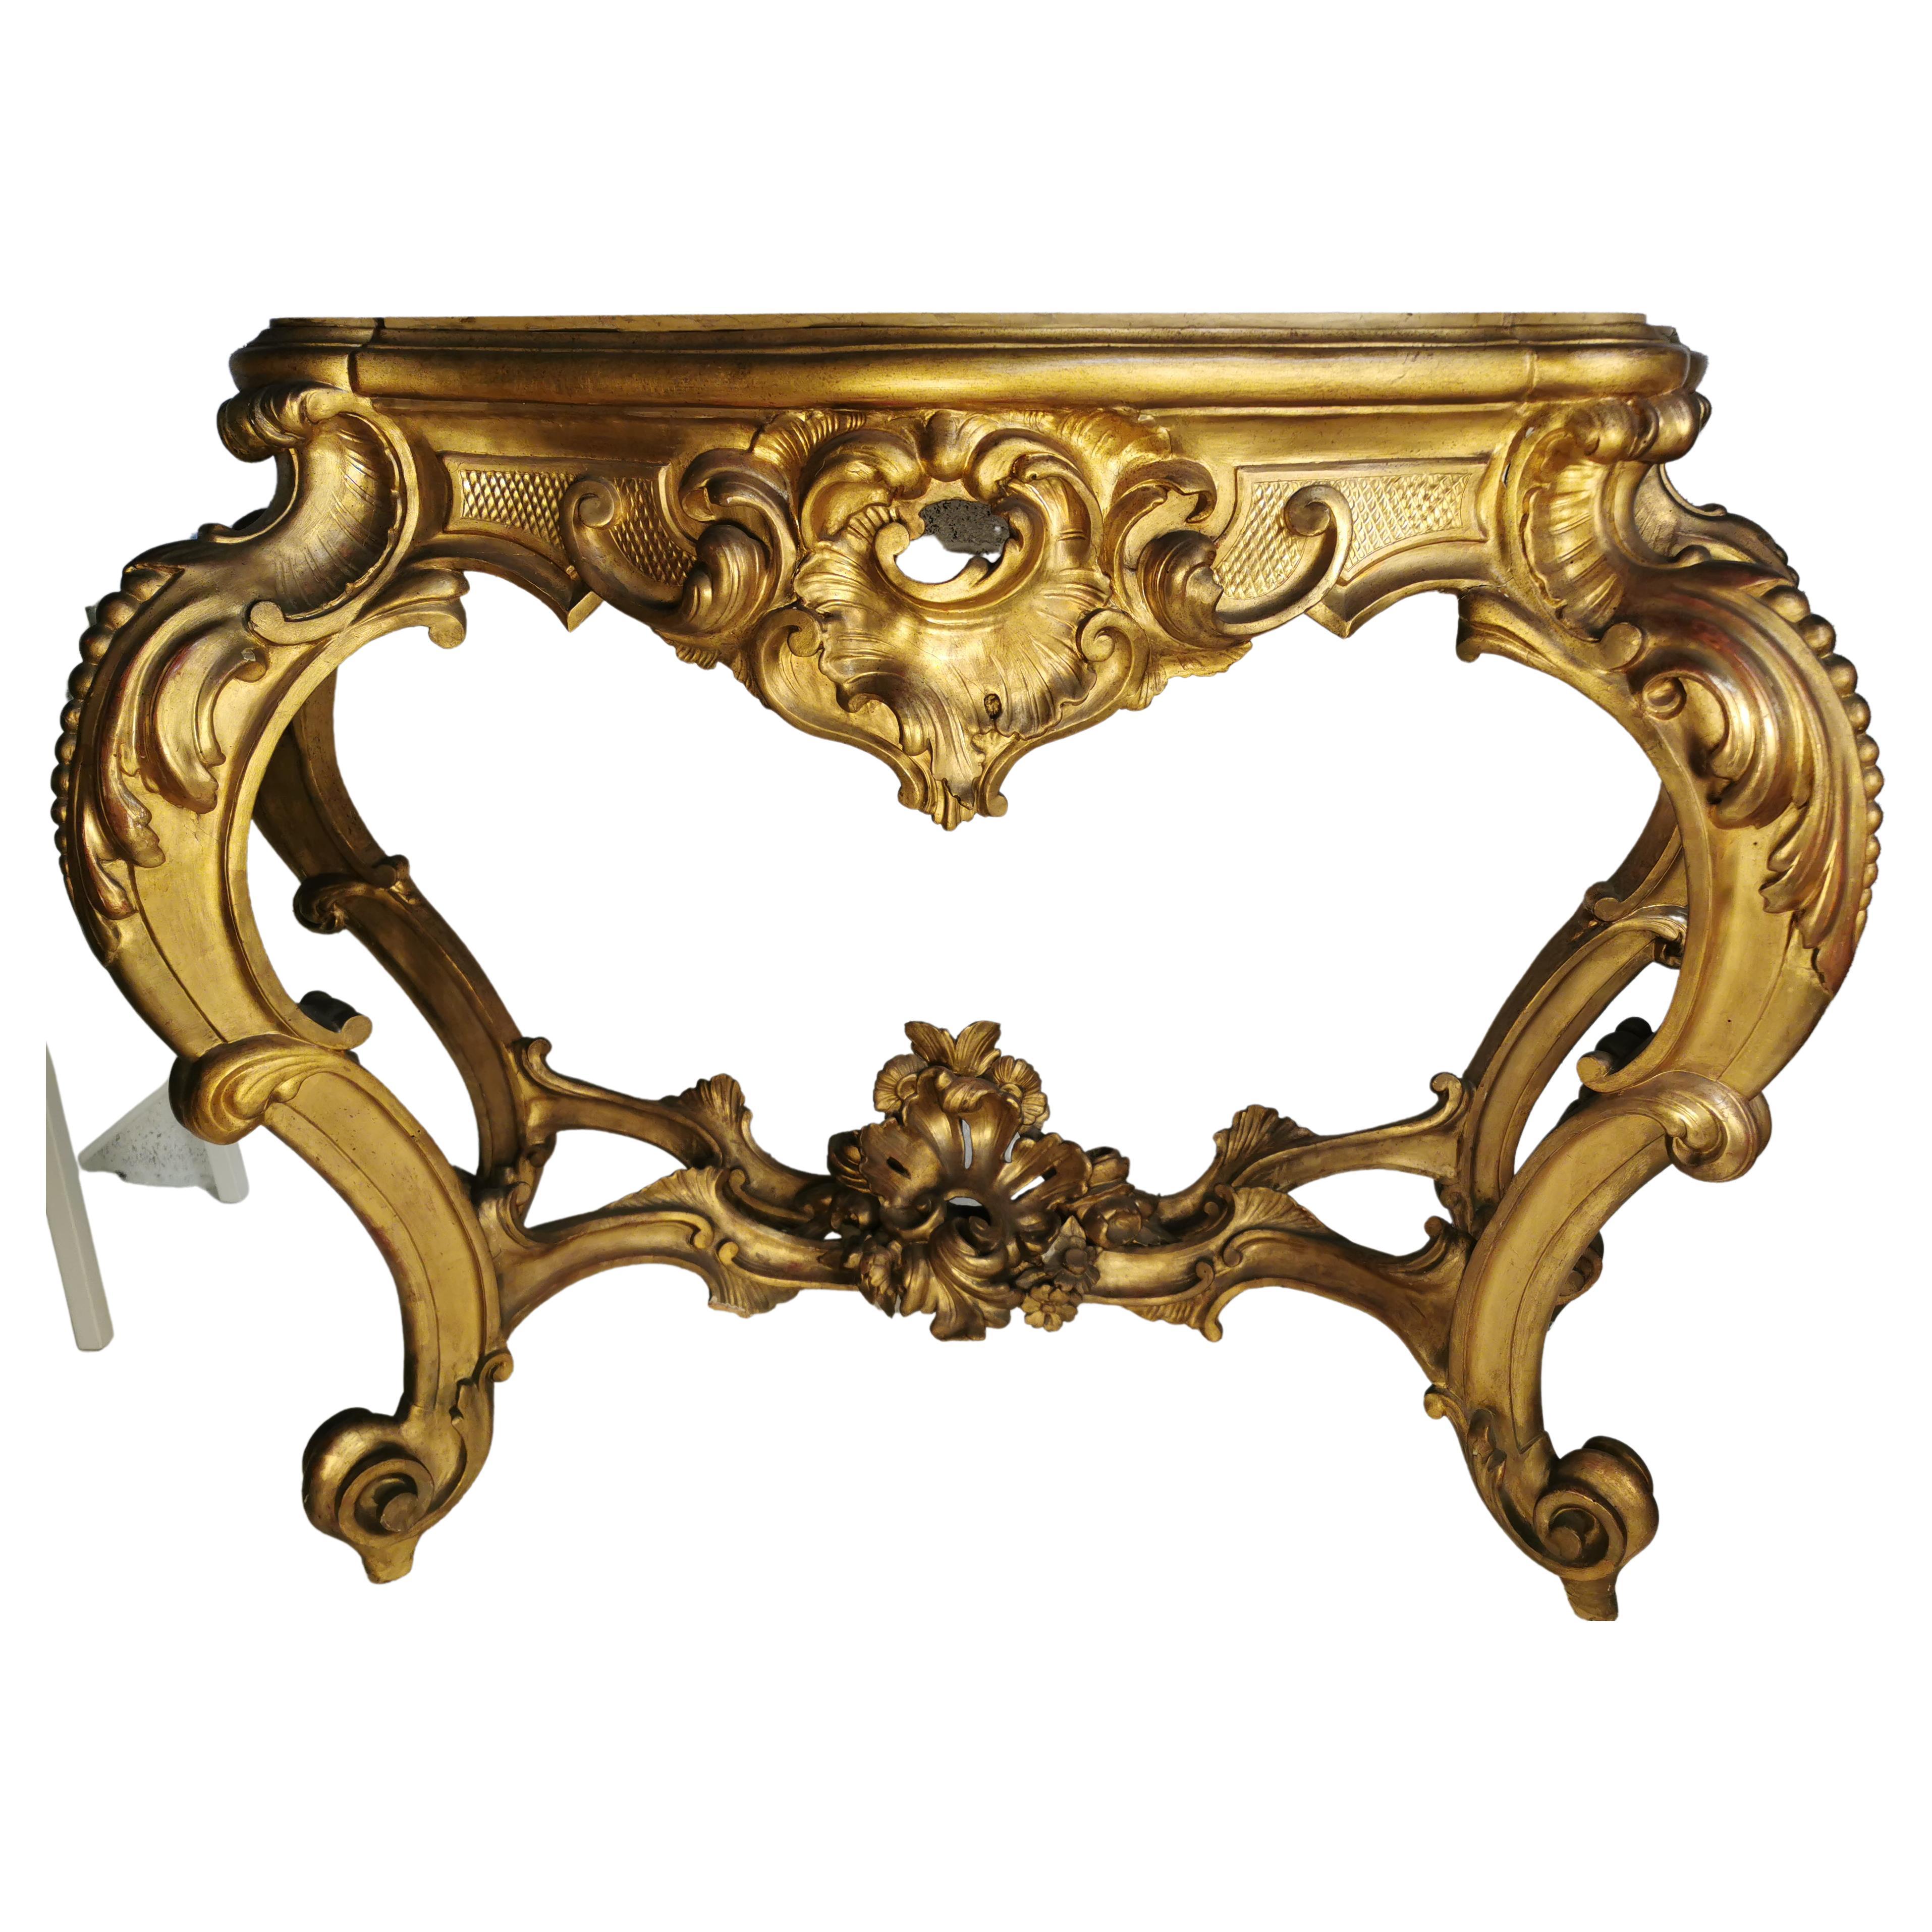 Big Dimension handcrafted golden console table, circa 1750-1760 Louis XV /  Italy Rome. Yellow golden painting what you see inside the console was used in 1700s, it is the same what you find behind the candelsticks and the scrolls of the 18th